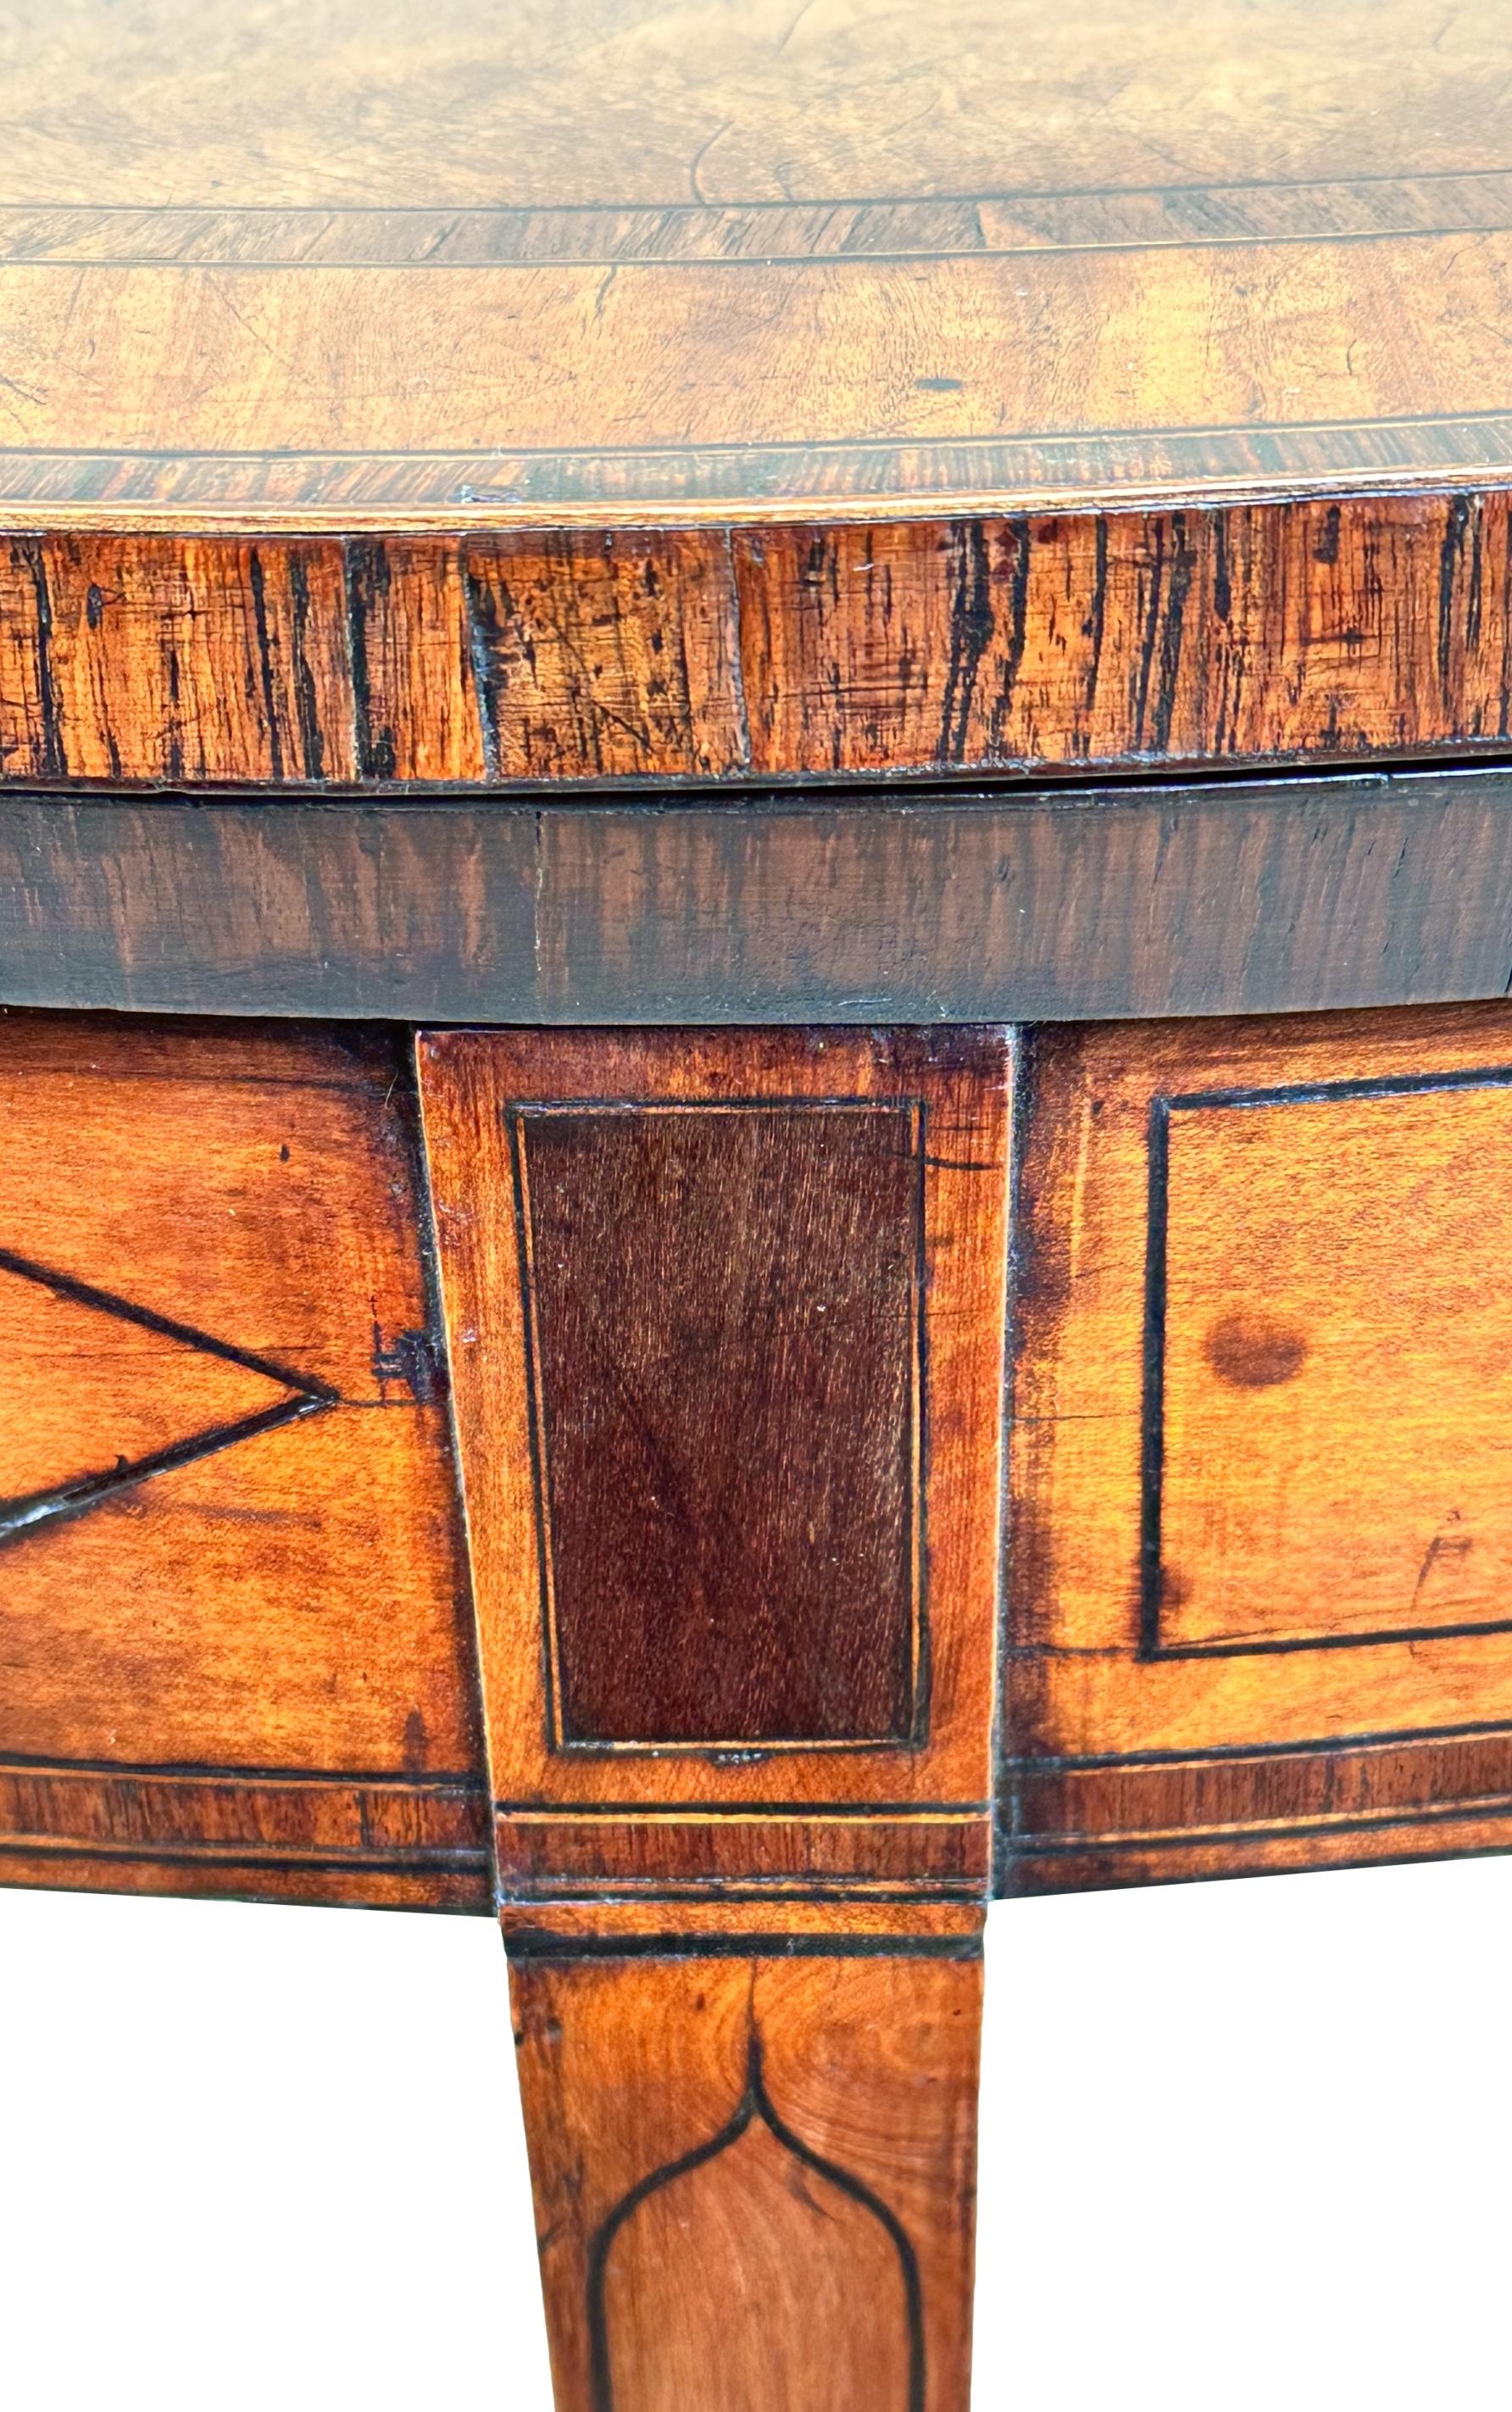 

A Very Good Quality George III, Sheraton Period, Satinwood Demi Lune Shaped Tea Table Having Exceptionally Well Figured Folding Top, With Wide Crossbanded Decoration, Over Inlaid Frieze Raised On Elegant Square Tapering Legs.

Tea tables, as the